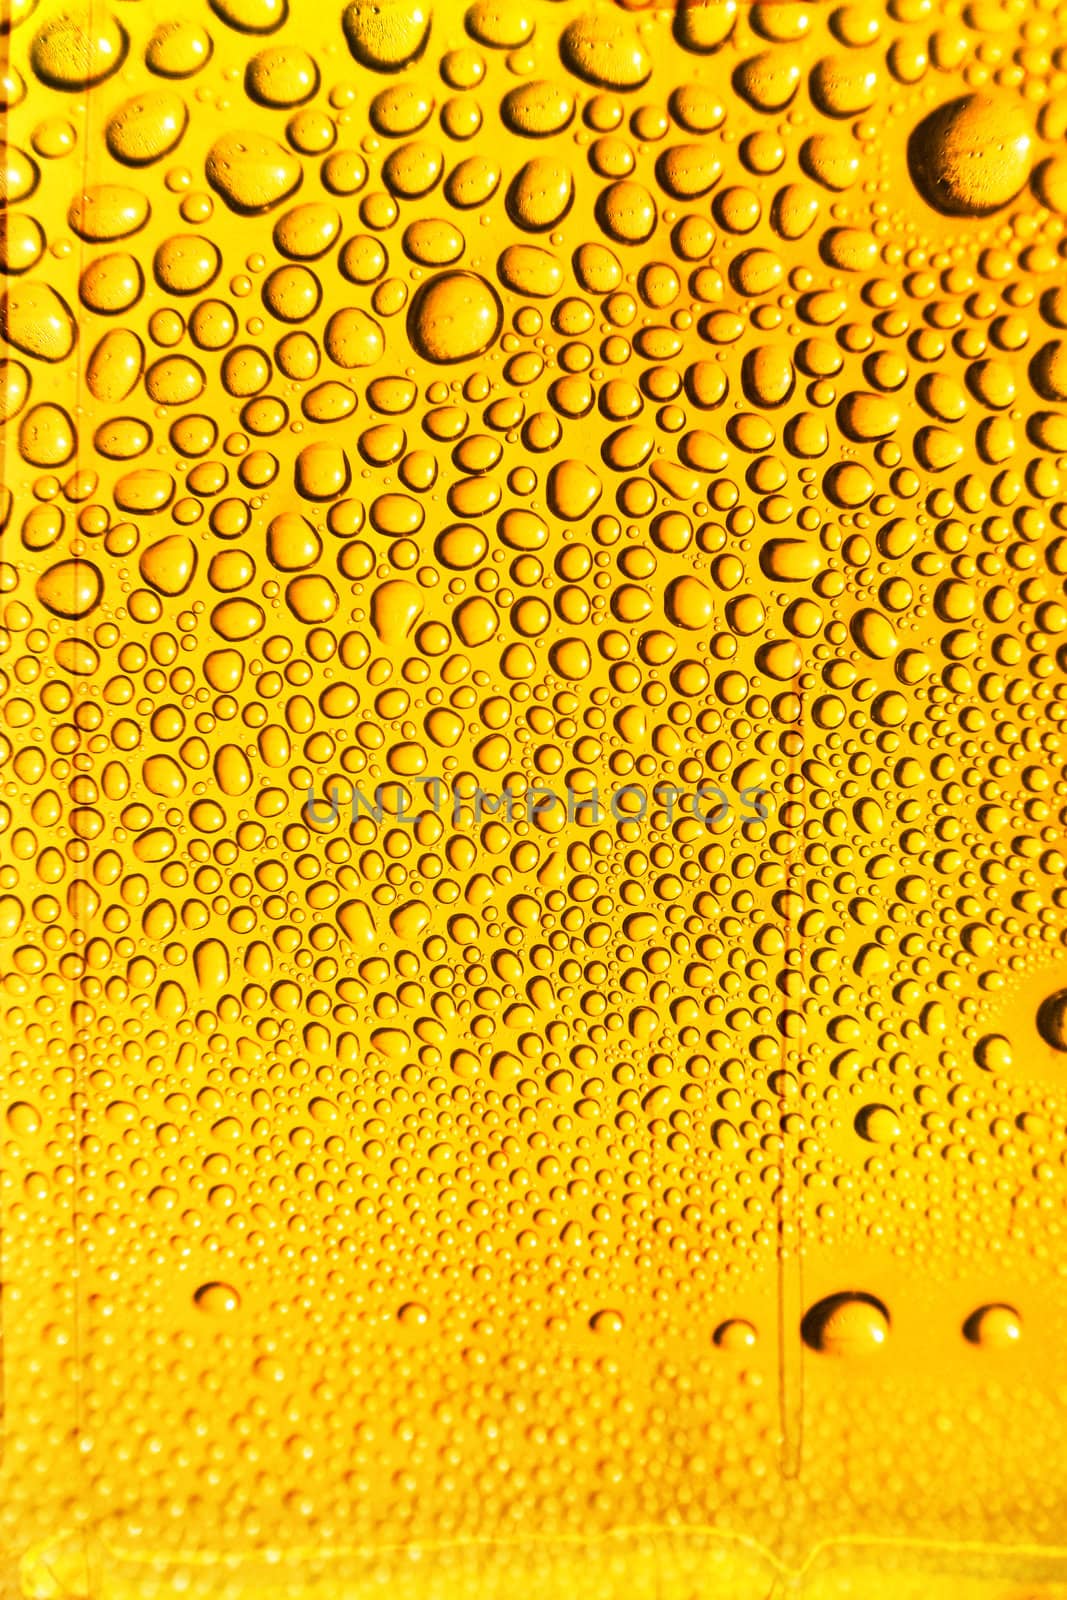 drops of the water on the glass of beer